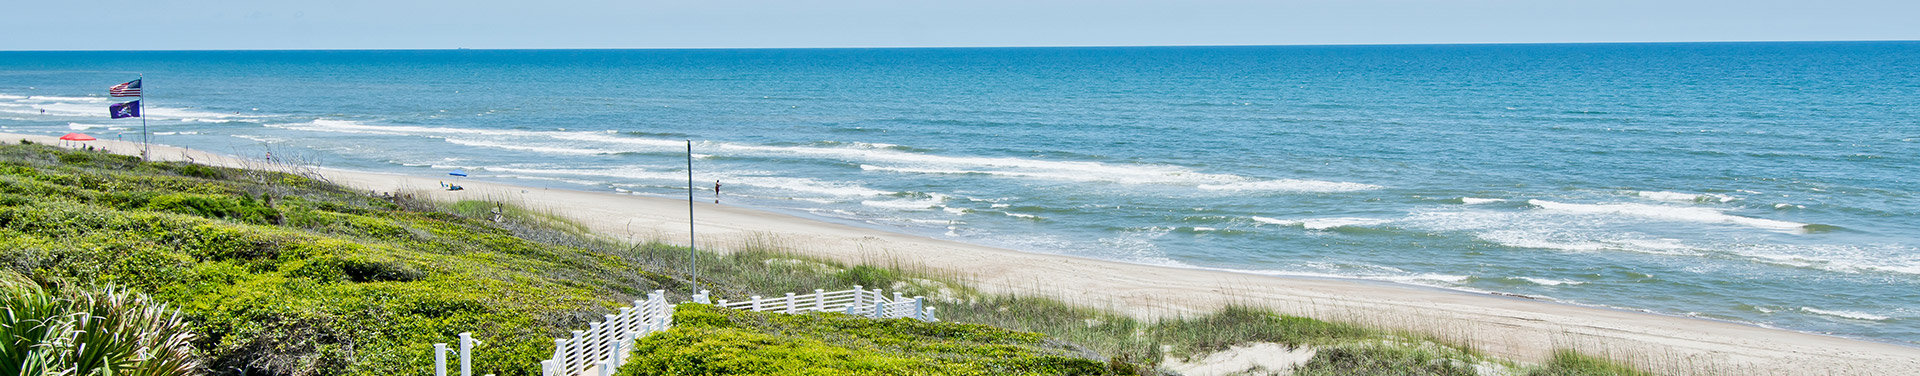 beautiful view of Indian Beach sandy beach and ocean waves